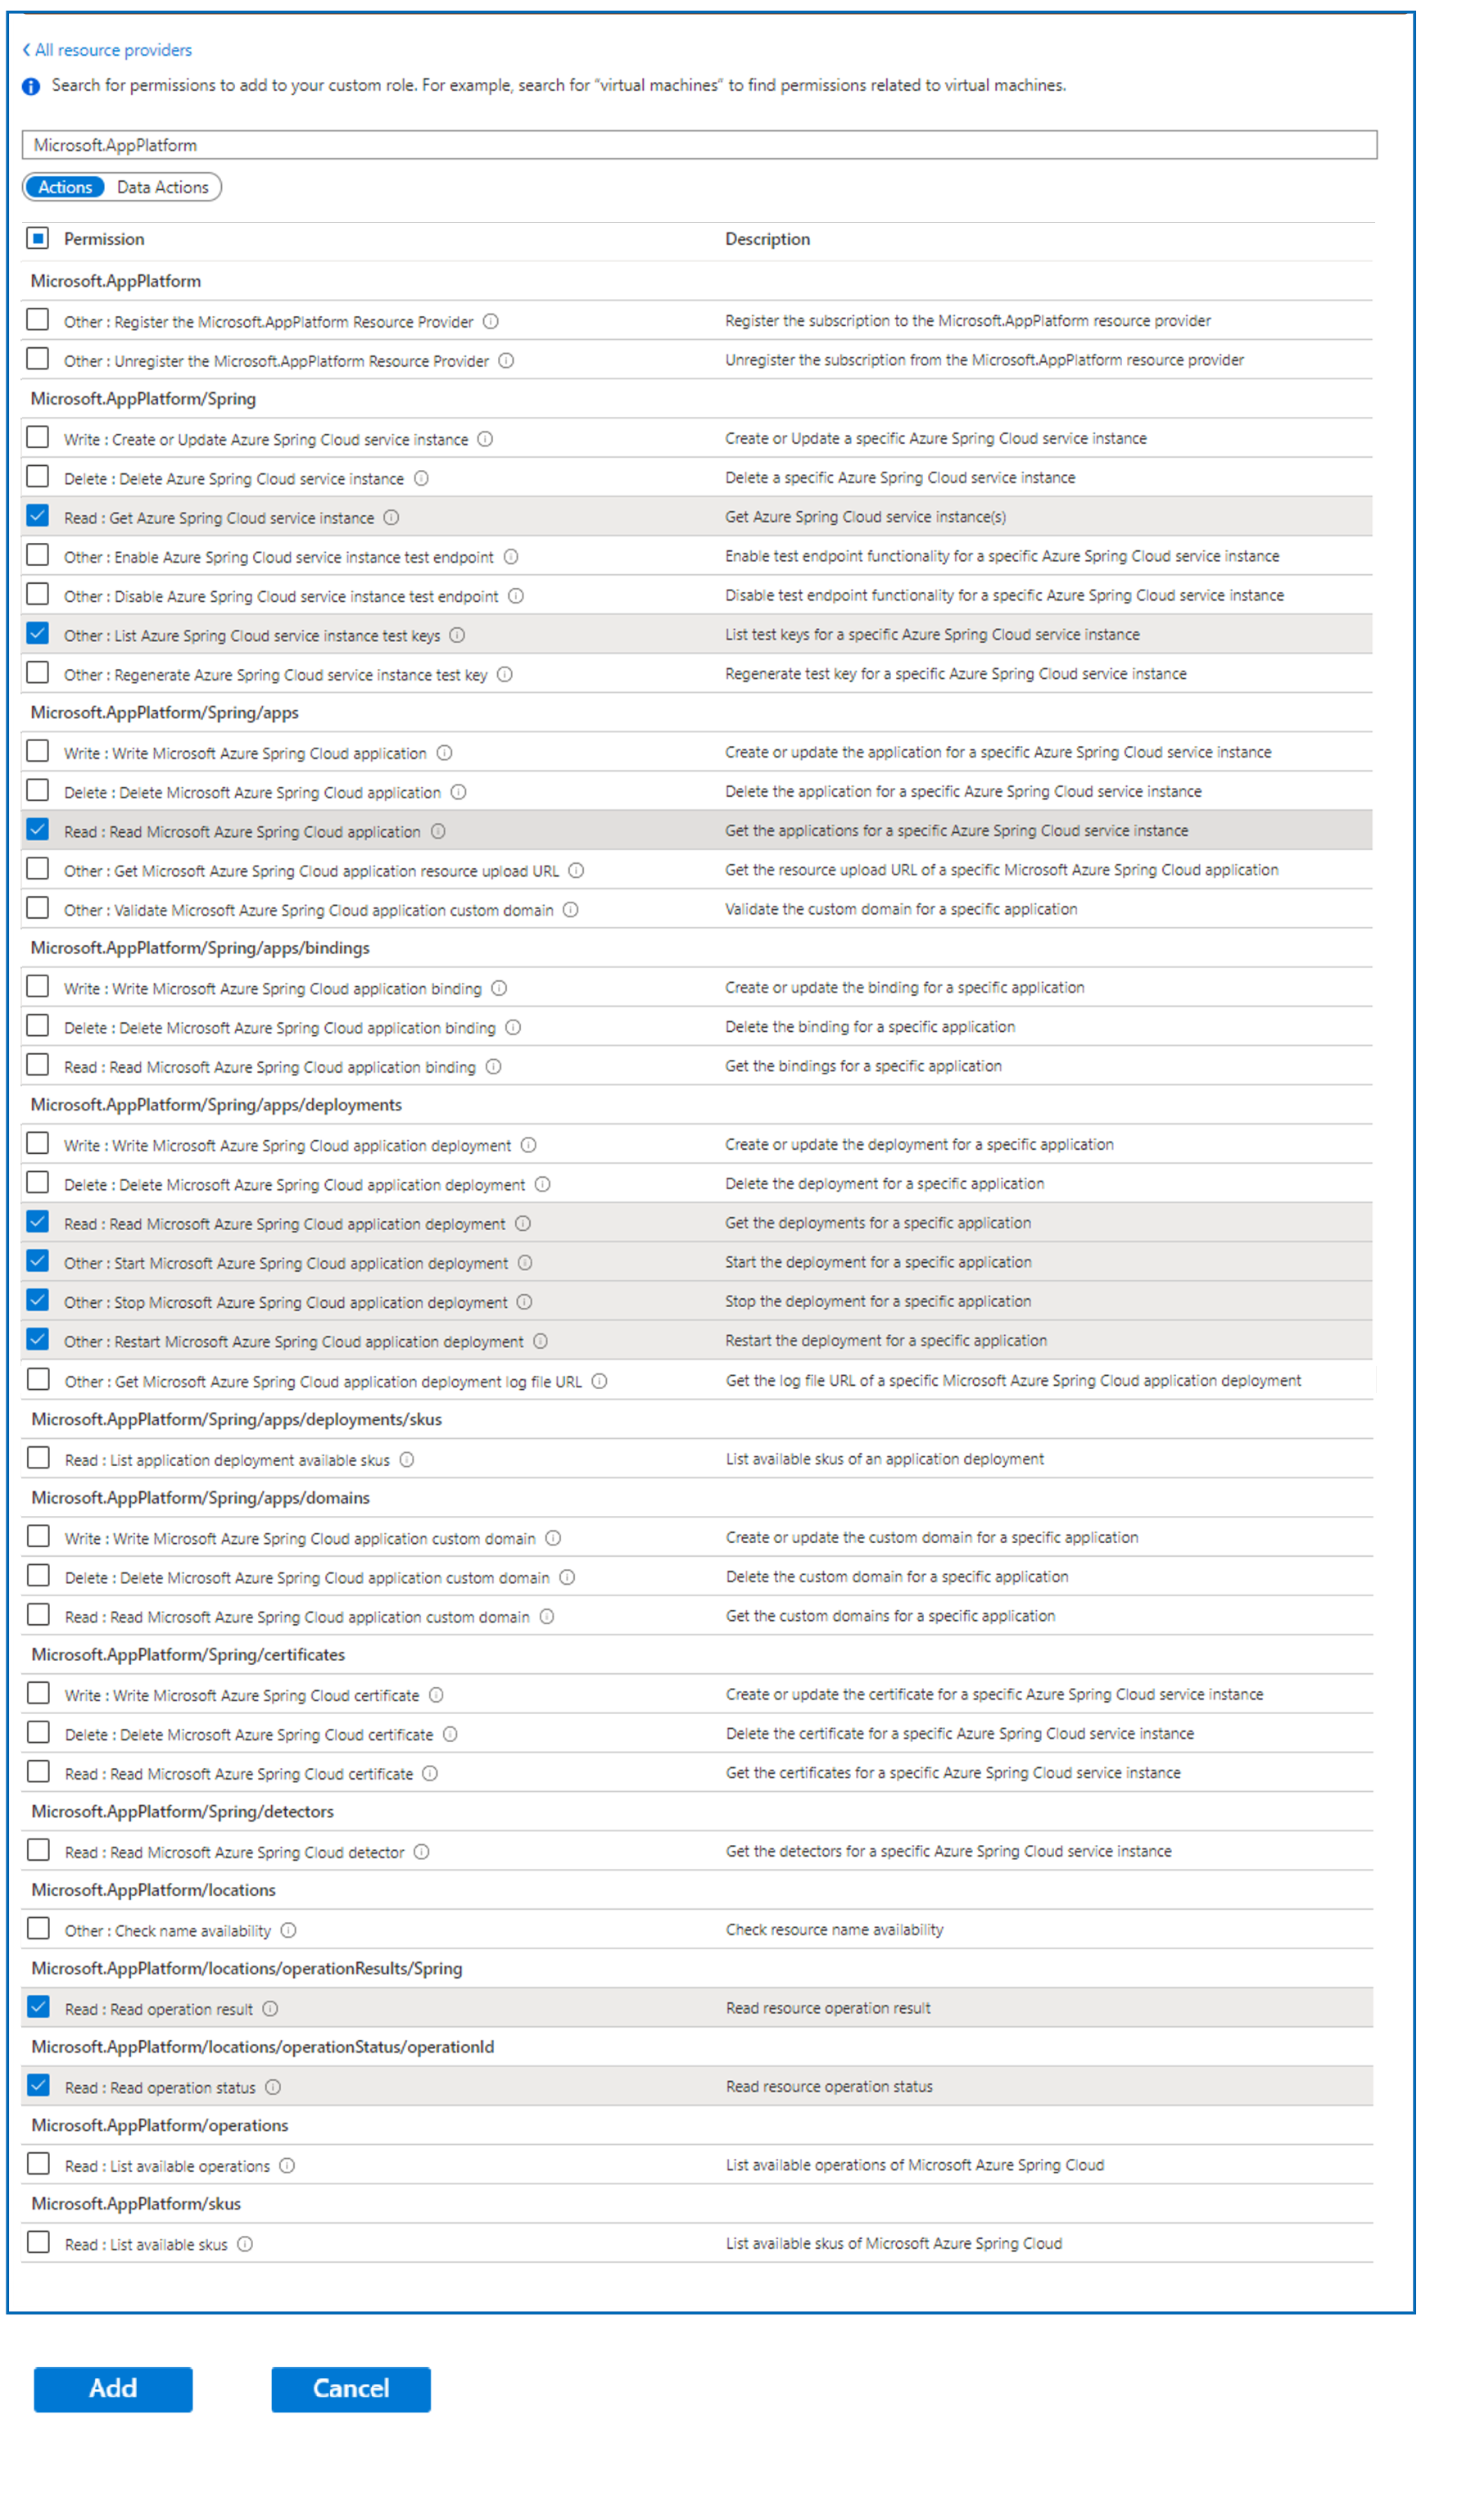 Screenshot of Azure portal that shows the selections for Ops - Site Reliability Engineering permissions.